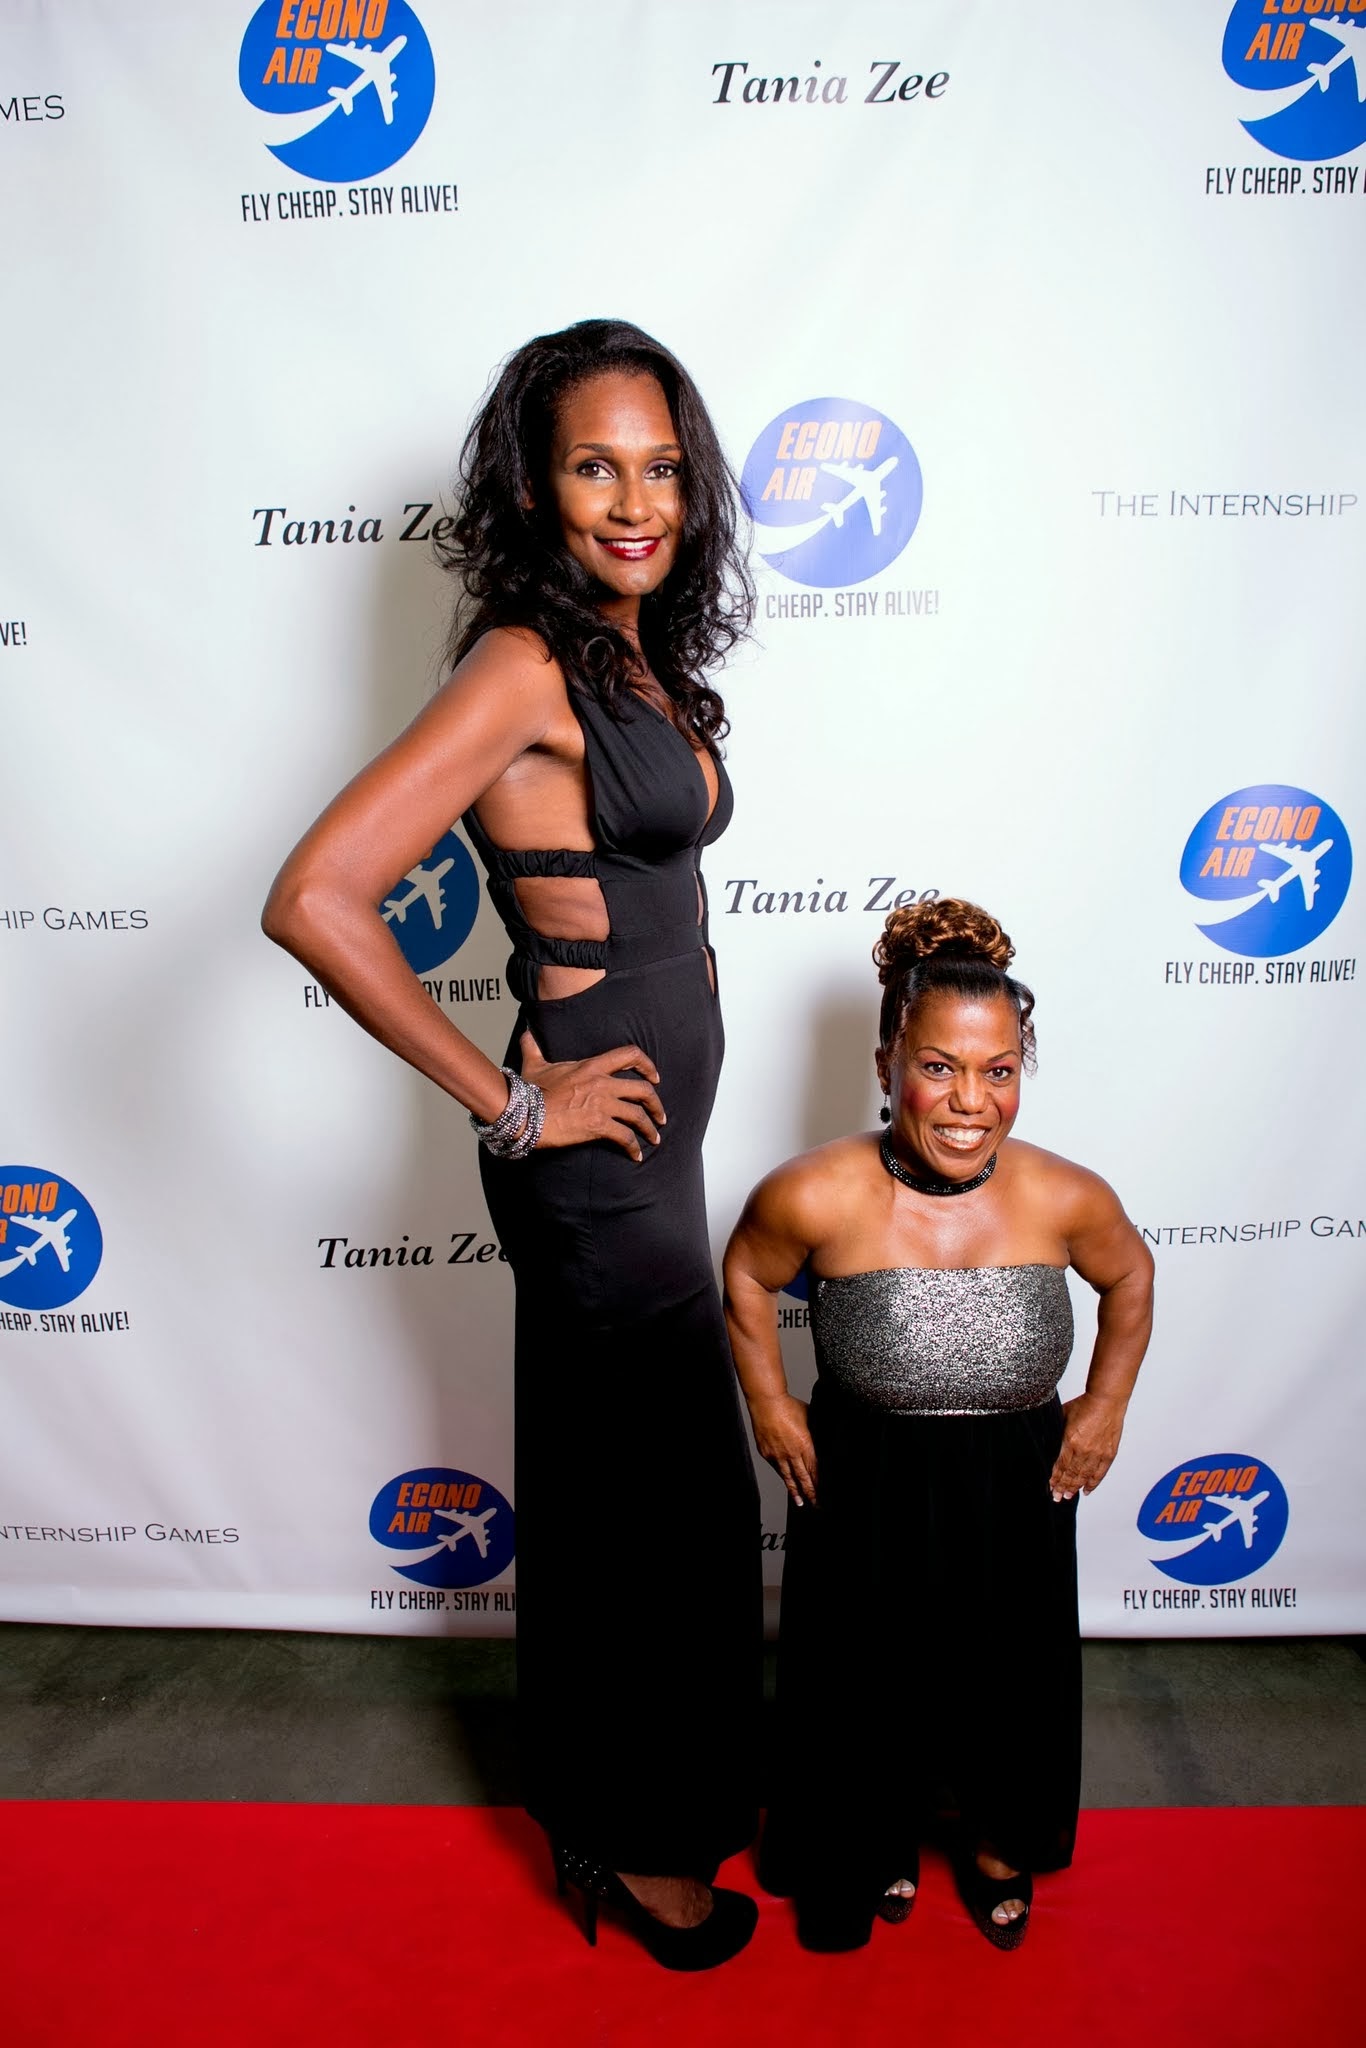 Co-Stars Tania Zee & Tonya Renee Banks (Little Women: LA) pose on the red carpet at a private screening of The Internship Games, to be released in late 2014.